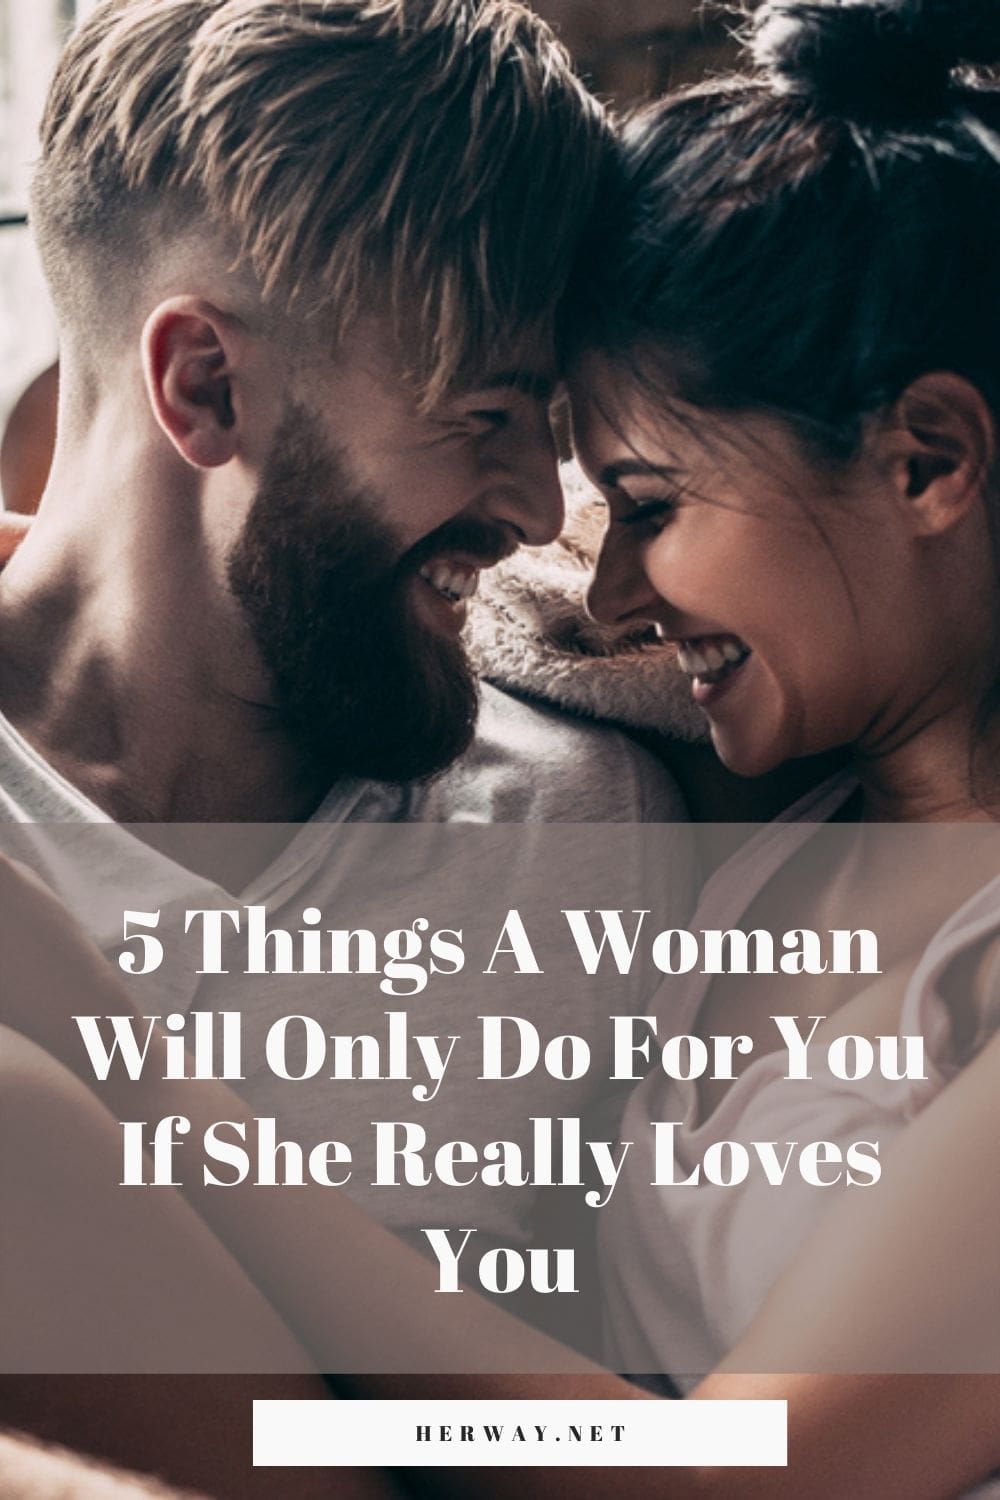 5 Things A Woman Will Only Do For You If She Really Loves You